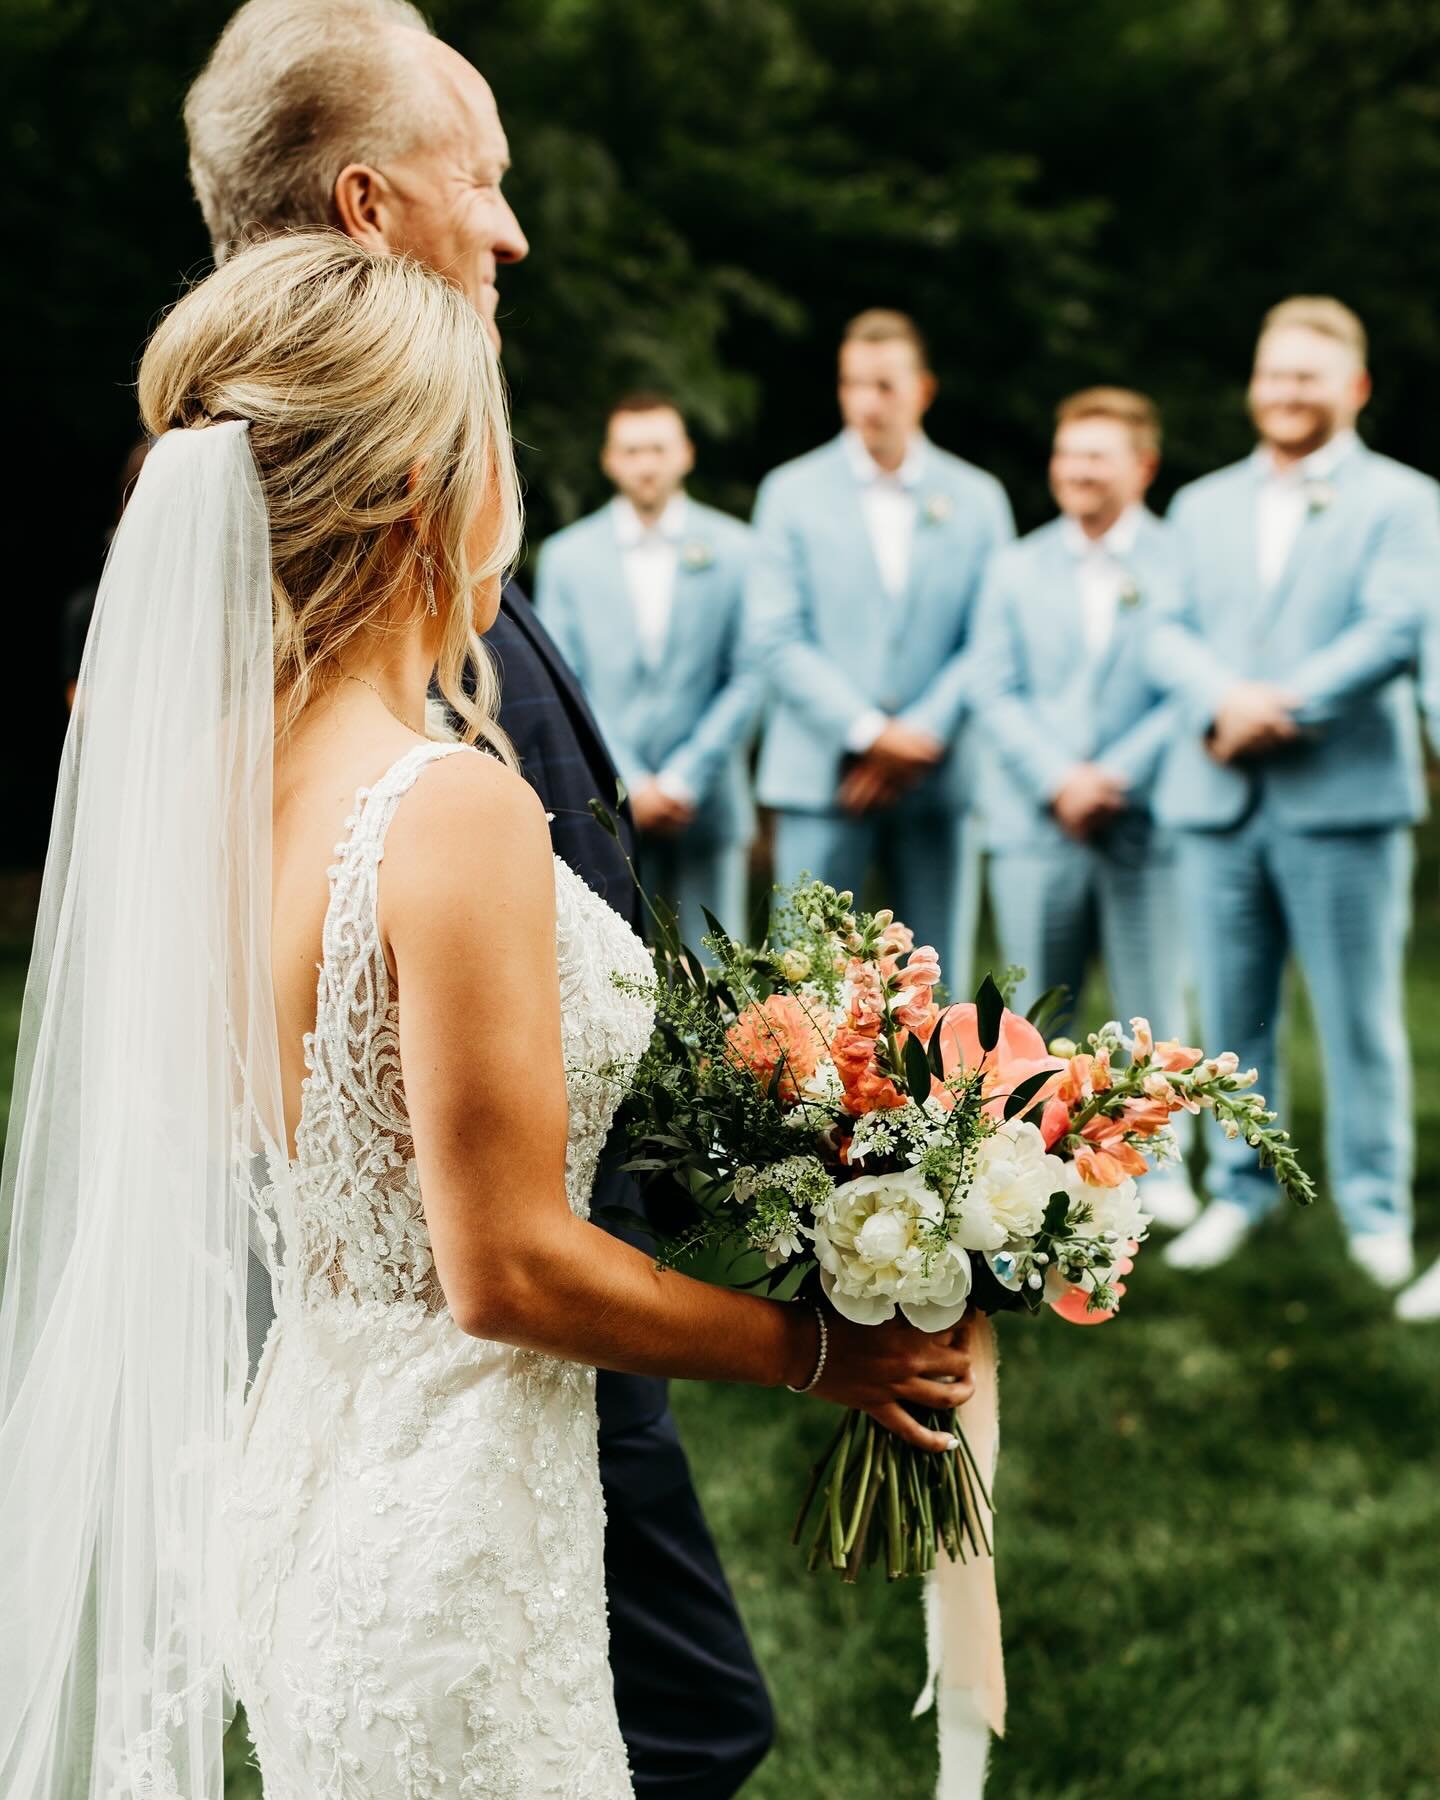 Spring wedding season is officially HERE!

Reminiscing on Nick + Katie&rsquo;s joyful day. The love was undeniable 🥹⁠
⁠
Katie&rsquo;s father walked her down the aisle, the couple exchanged personal vows, washed each others feet and took communion. ⁠